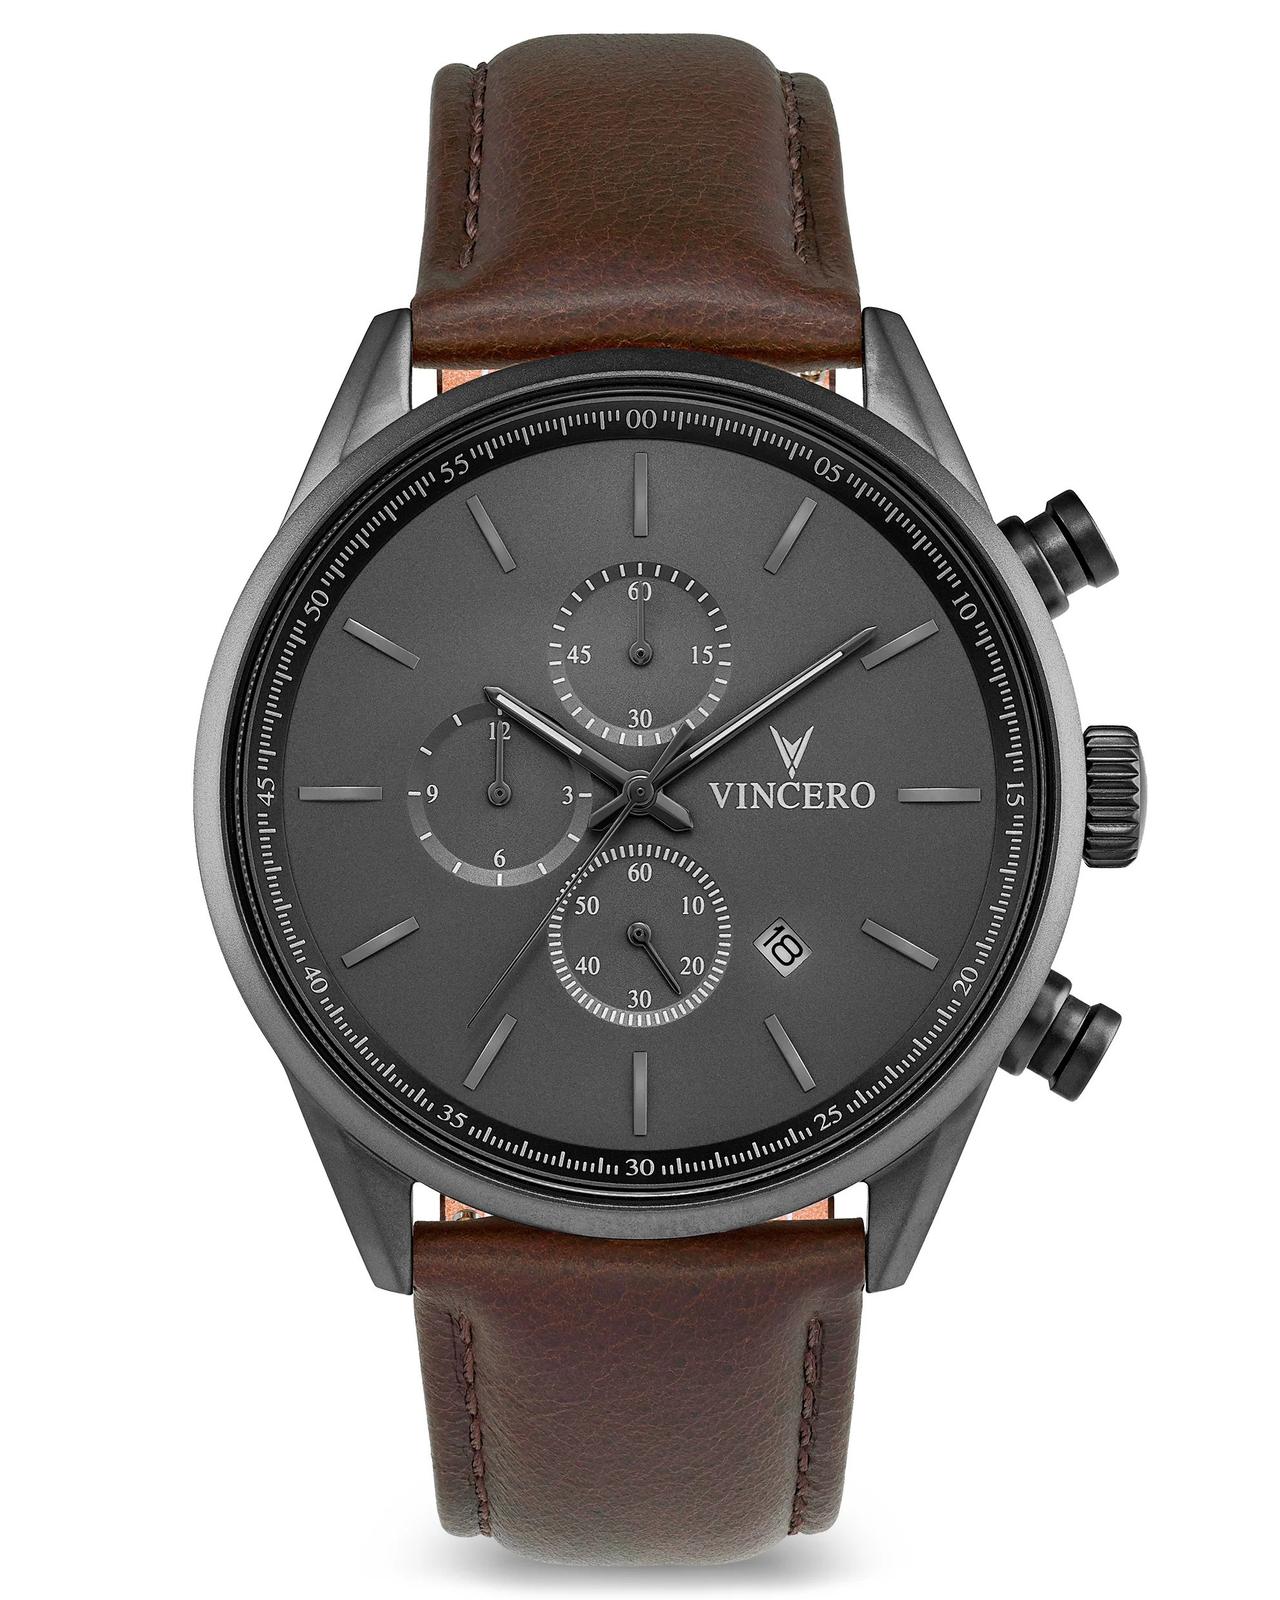 Leather strap watch one-year anniversary gift for him